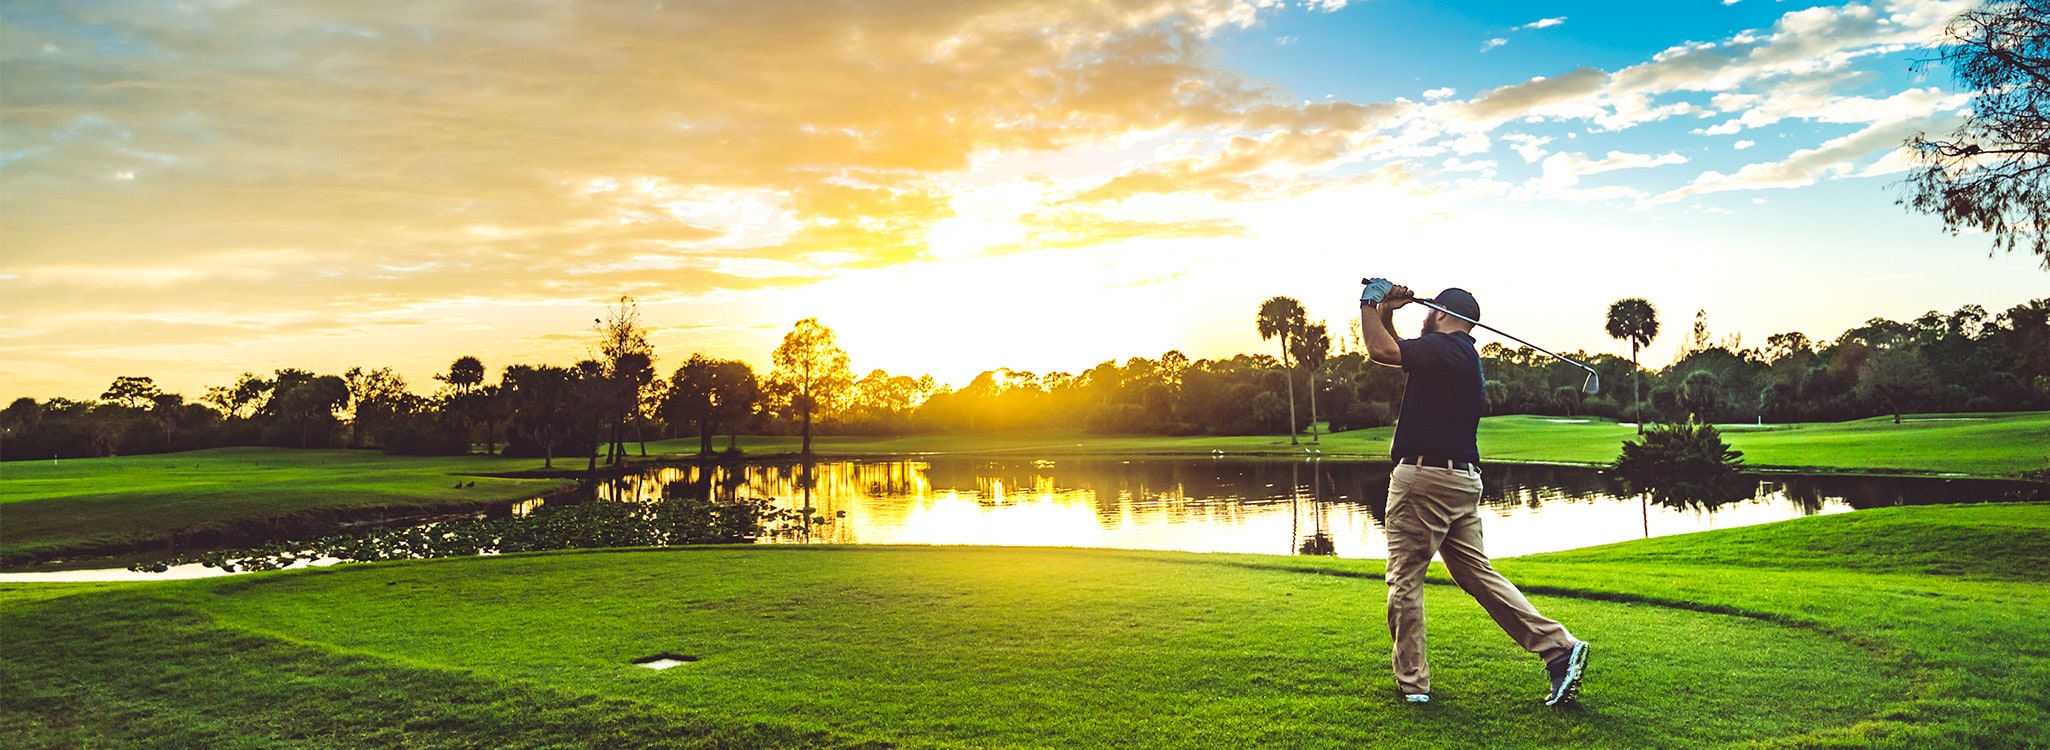 Golfer swinging a club at a course at sunset.